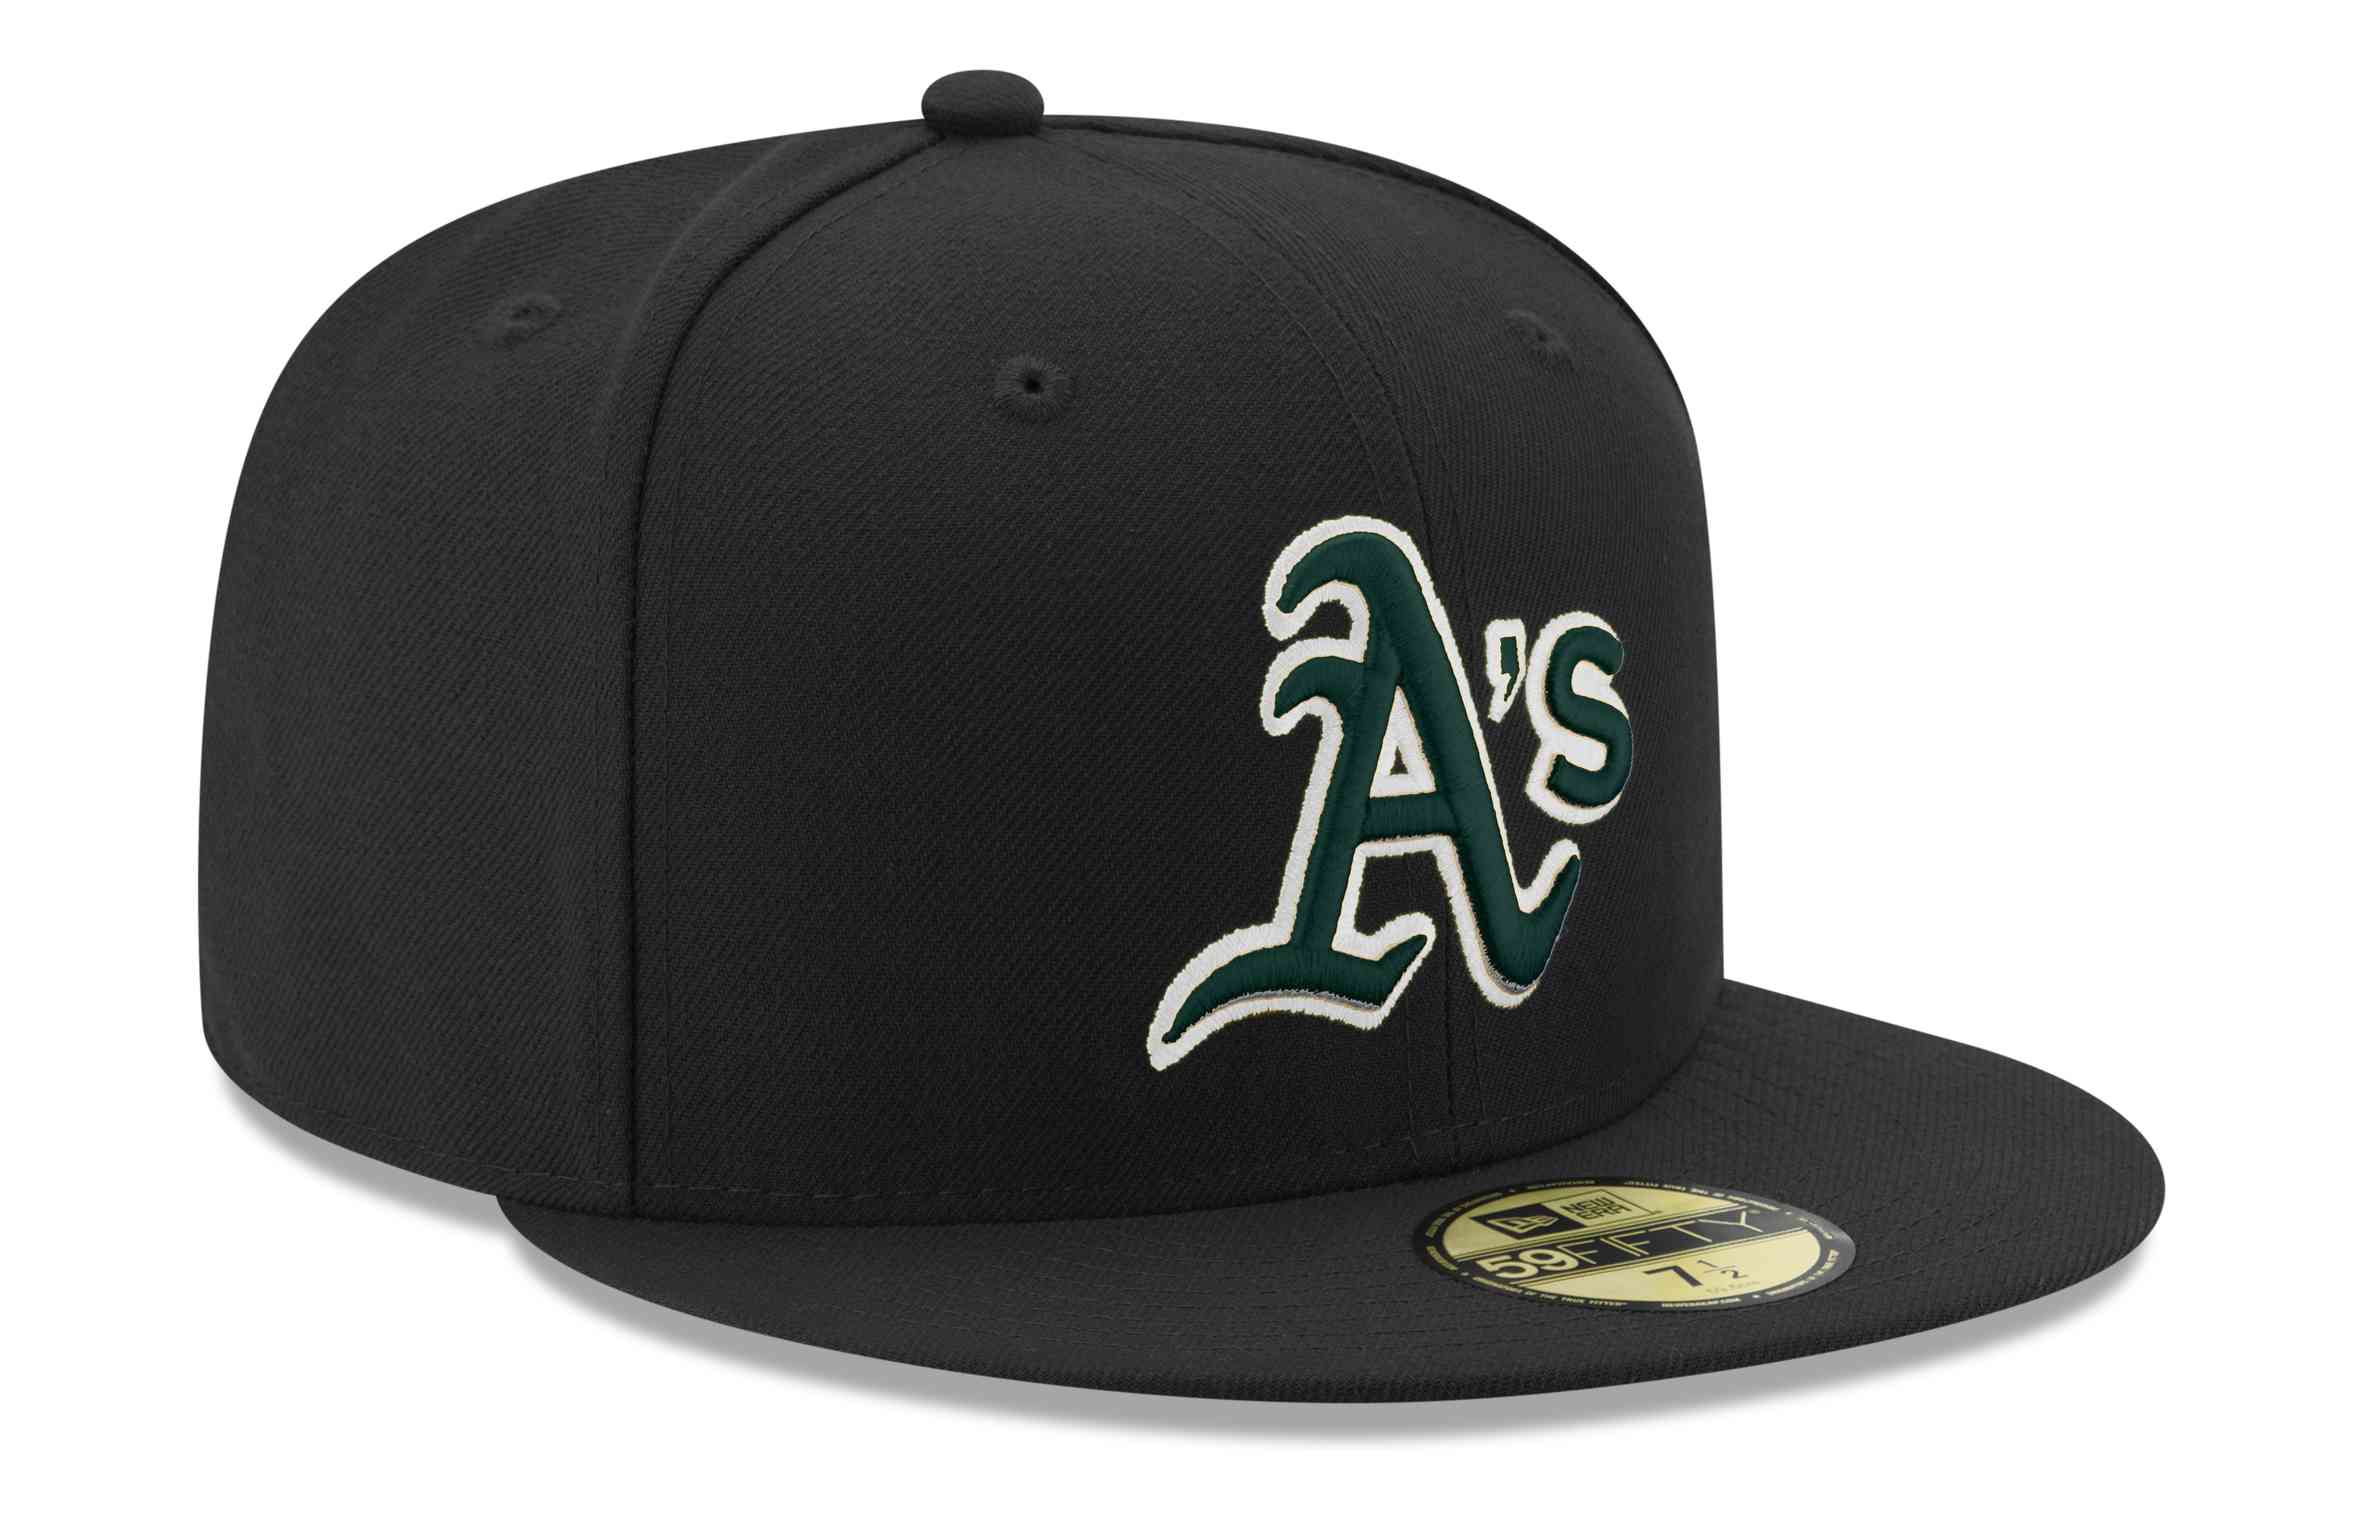 New Era - MLB Oakland Athletics Repreve 59Fifty Fitted Cap